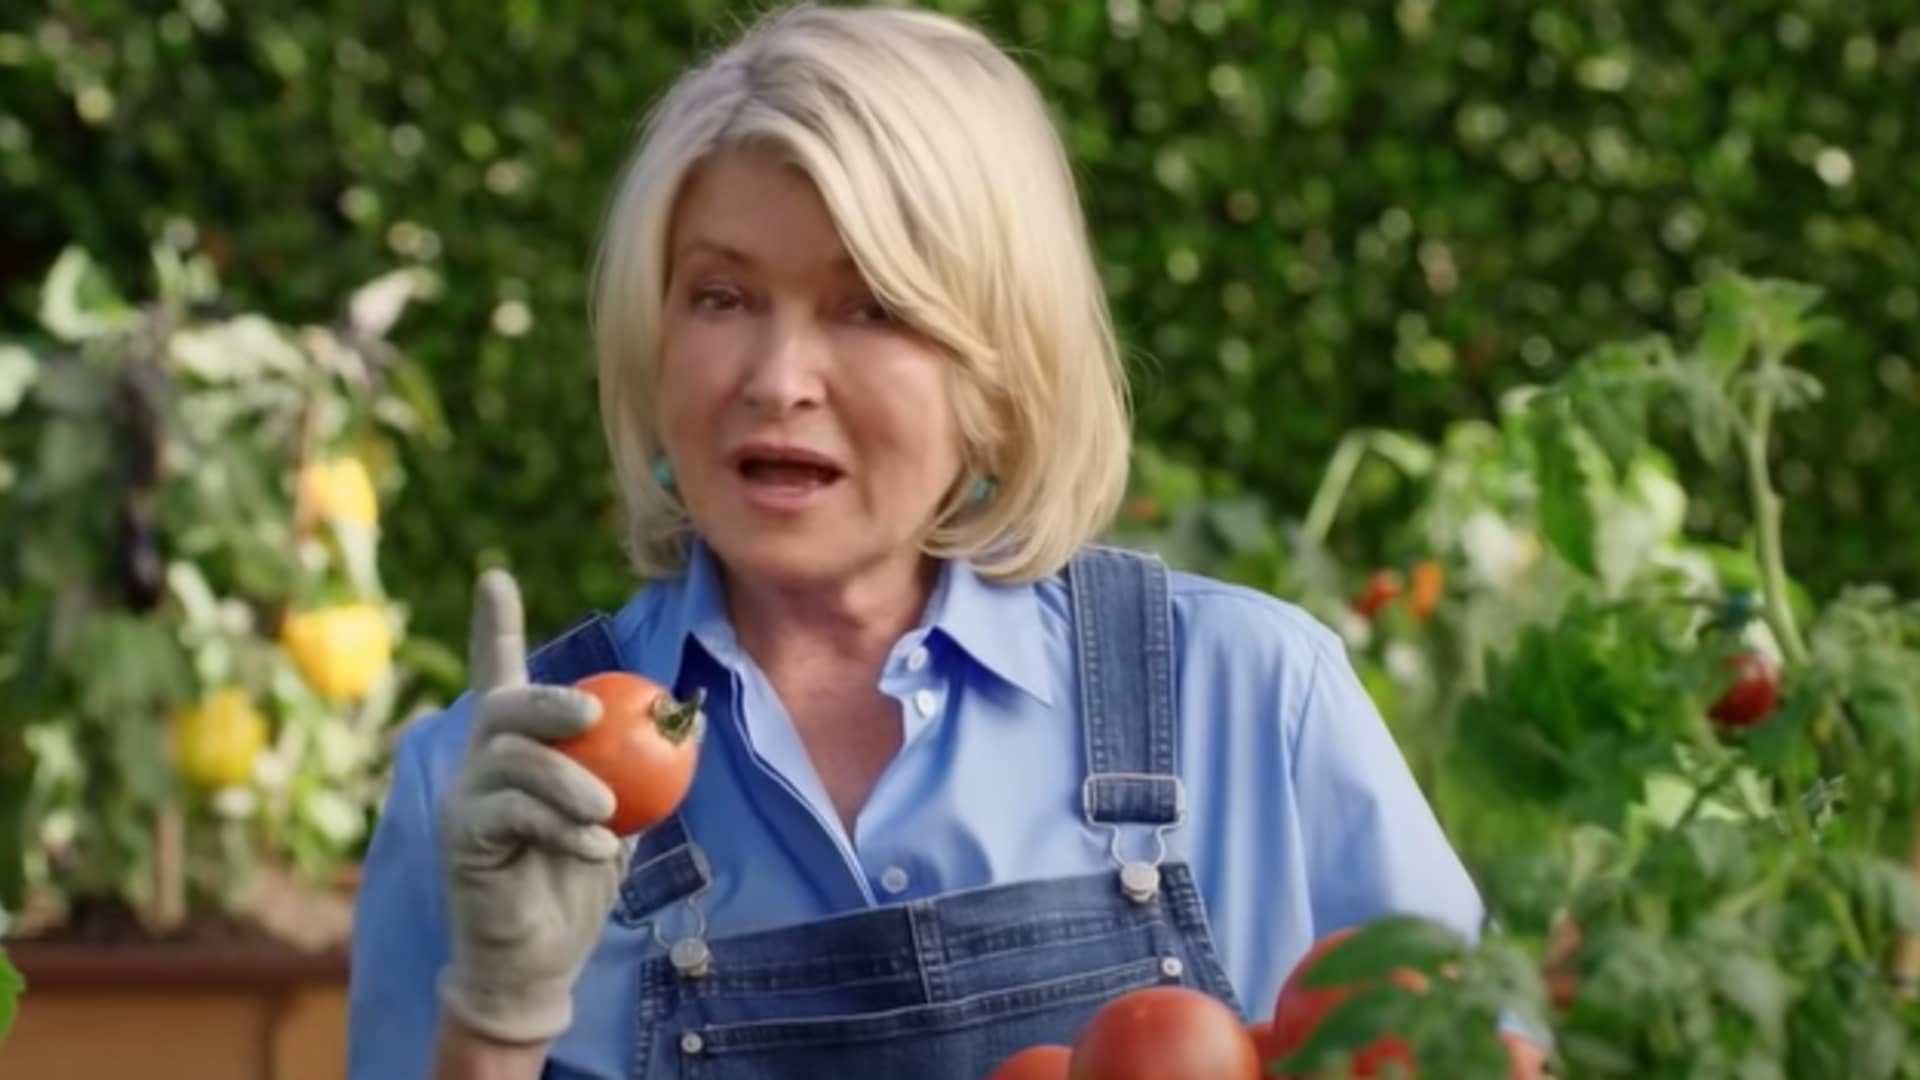 Still from Scotts Miracle-Gro Super Bowl commercial.